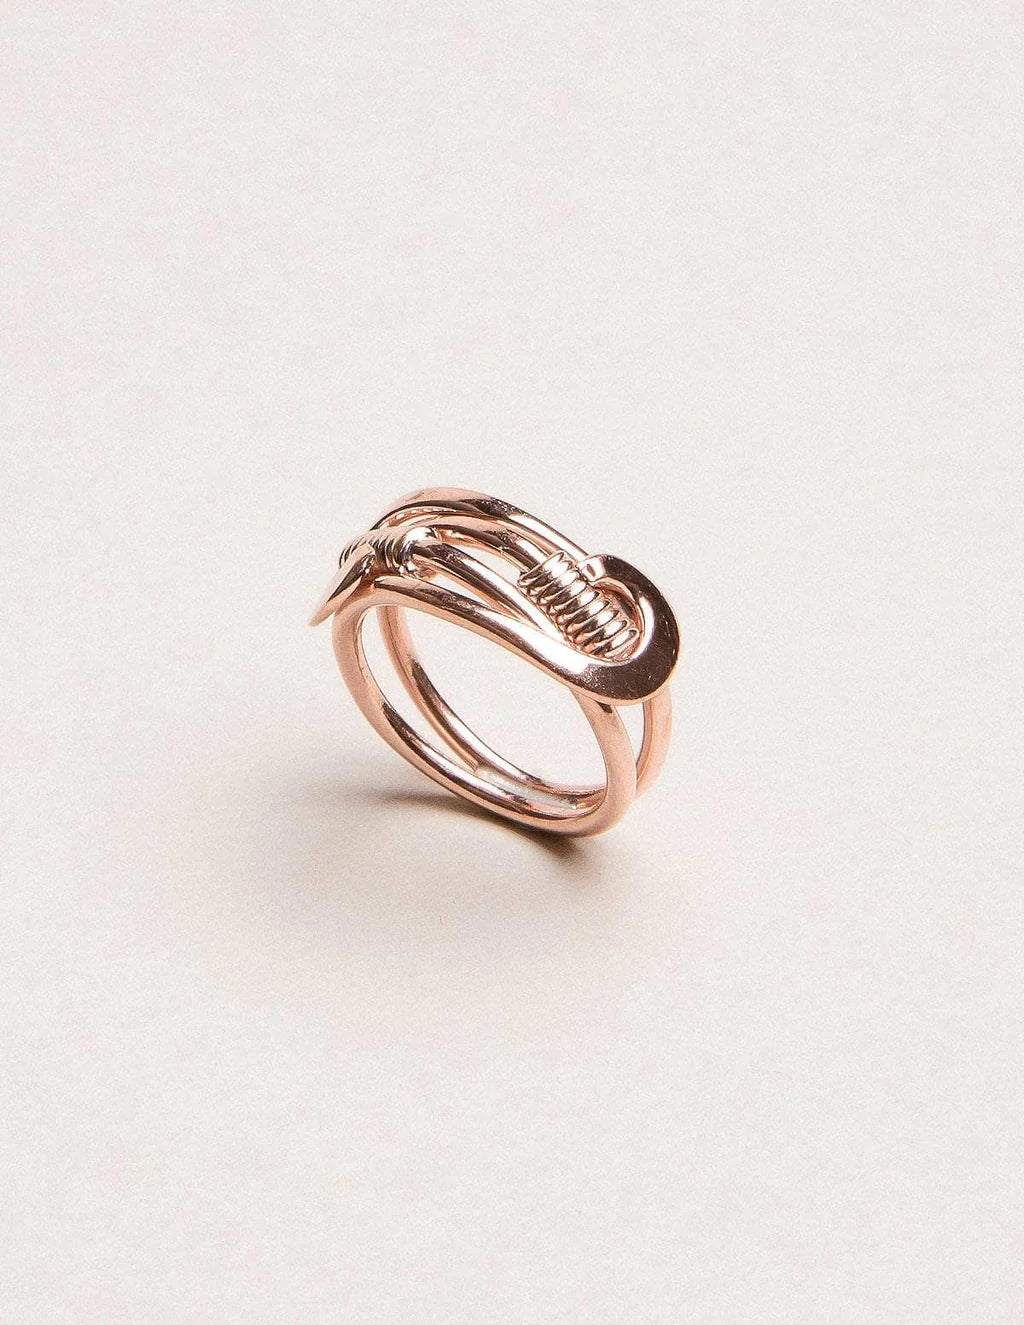 RING 828 - Snake Ring in 18kt Rose Gold - Michael Alexander Jewelry